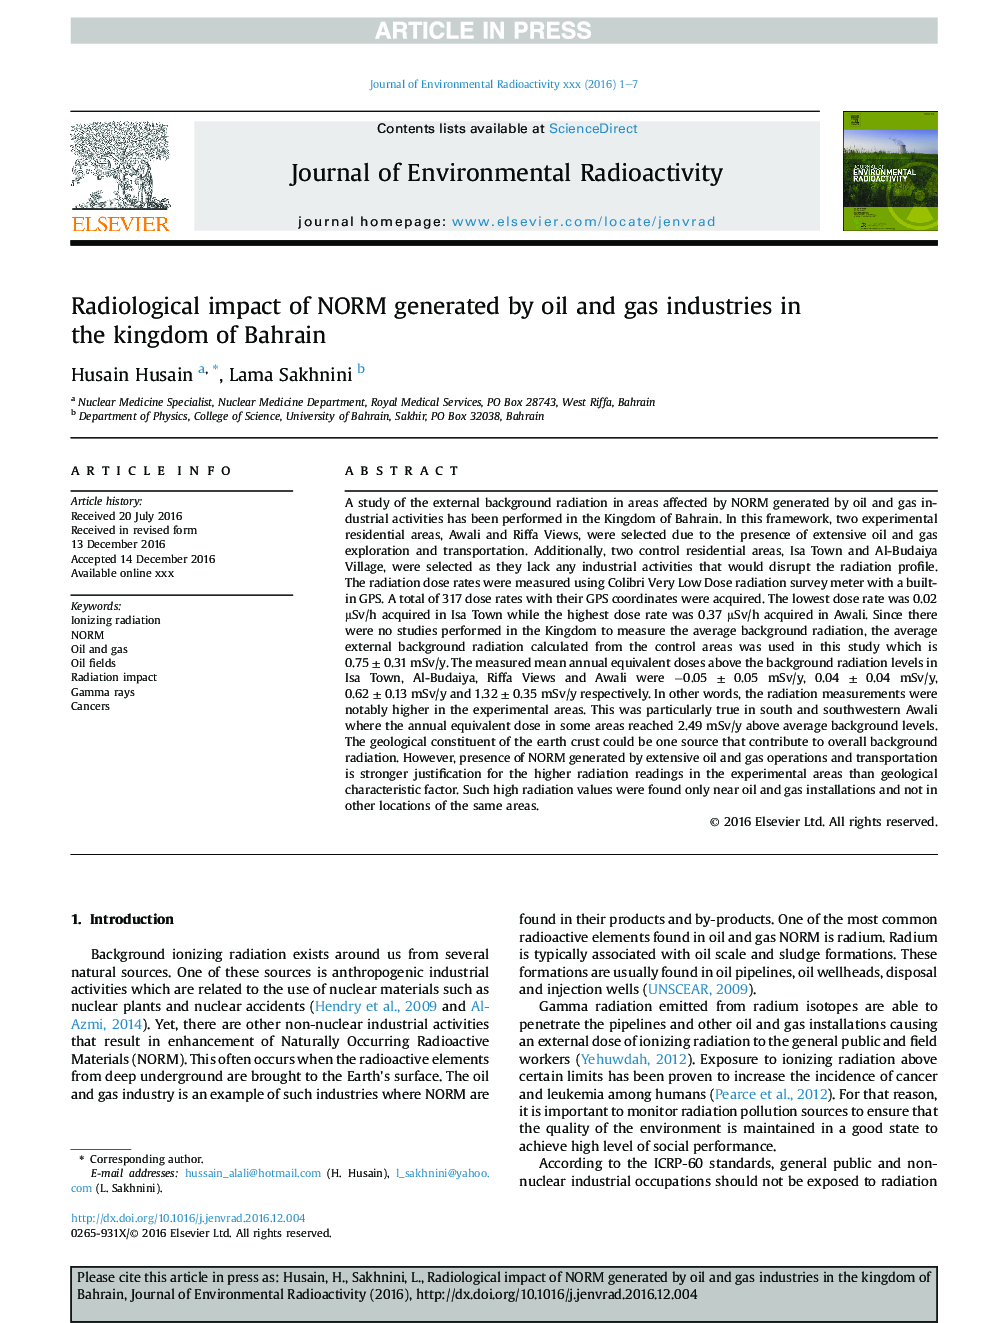 Radiological impact of NORM generated by oil and gas industries in the kingdom of Bahrain